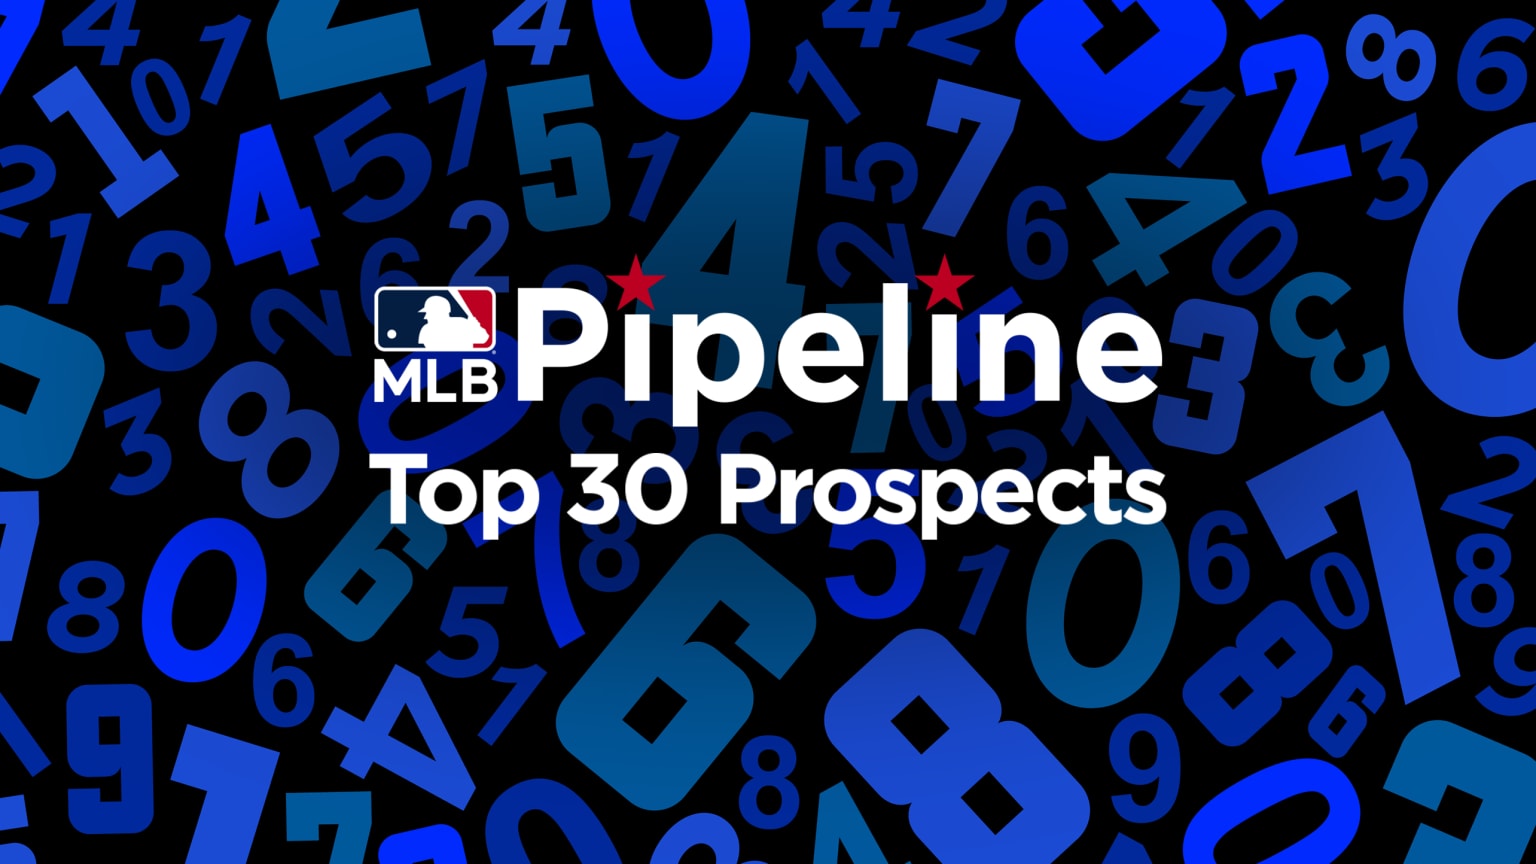 The words ''MLB Pipeline Top 30 Prospects'' in white against a background of scattered numbers in various shades of blue